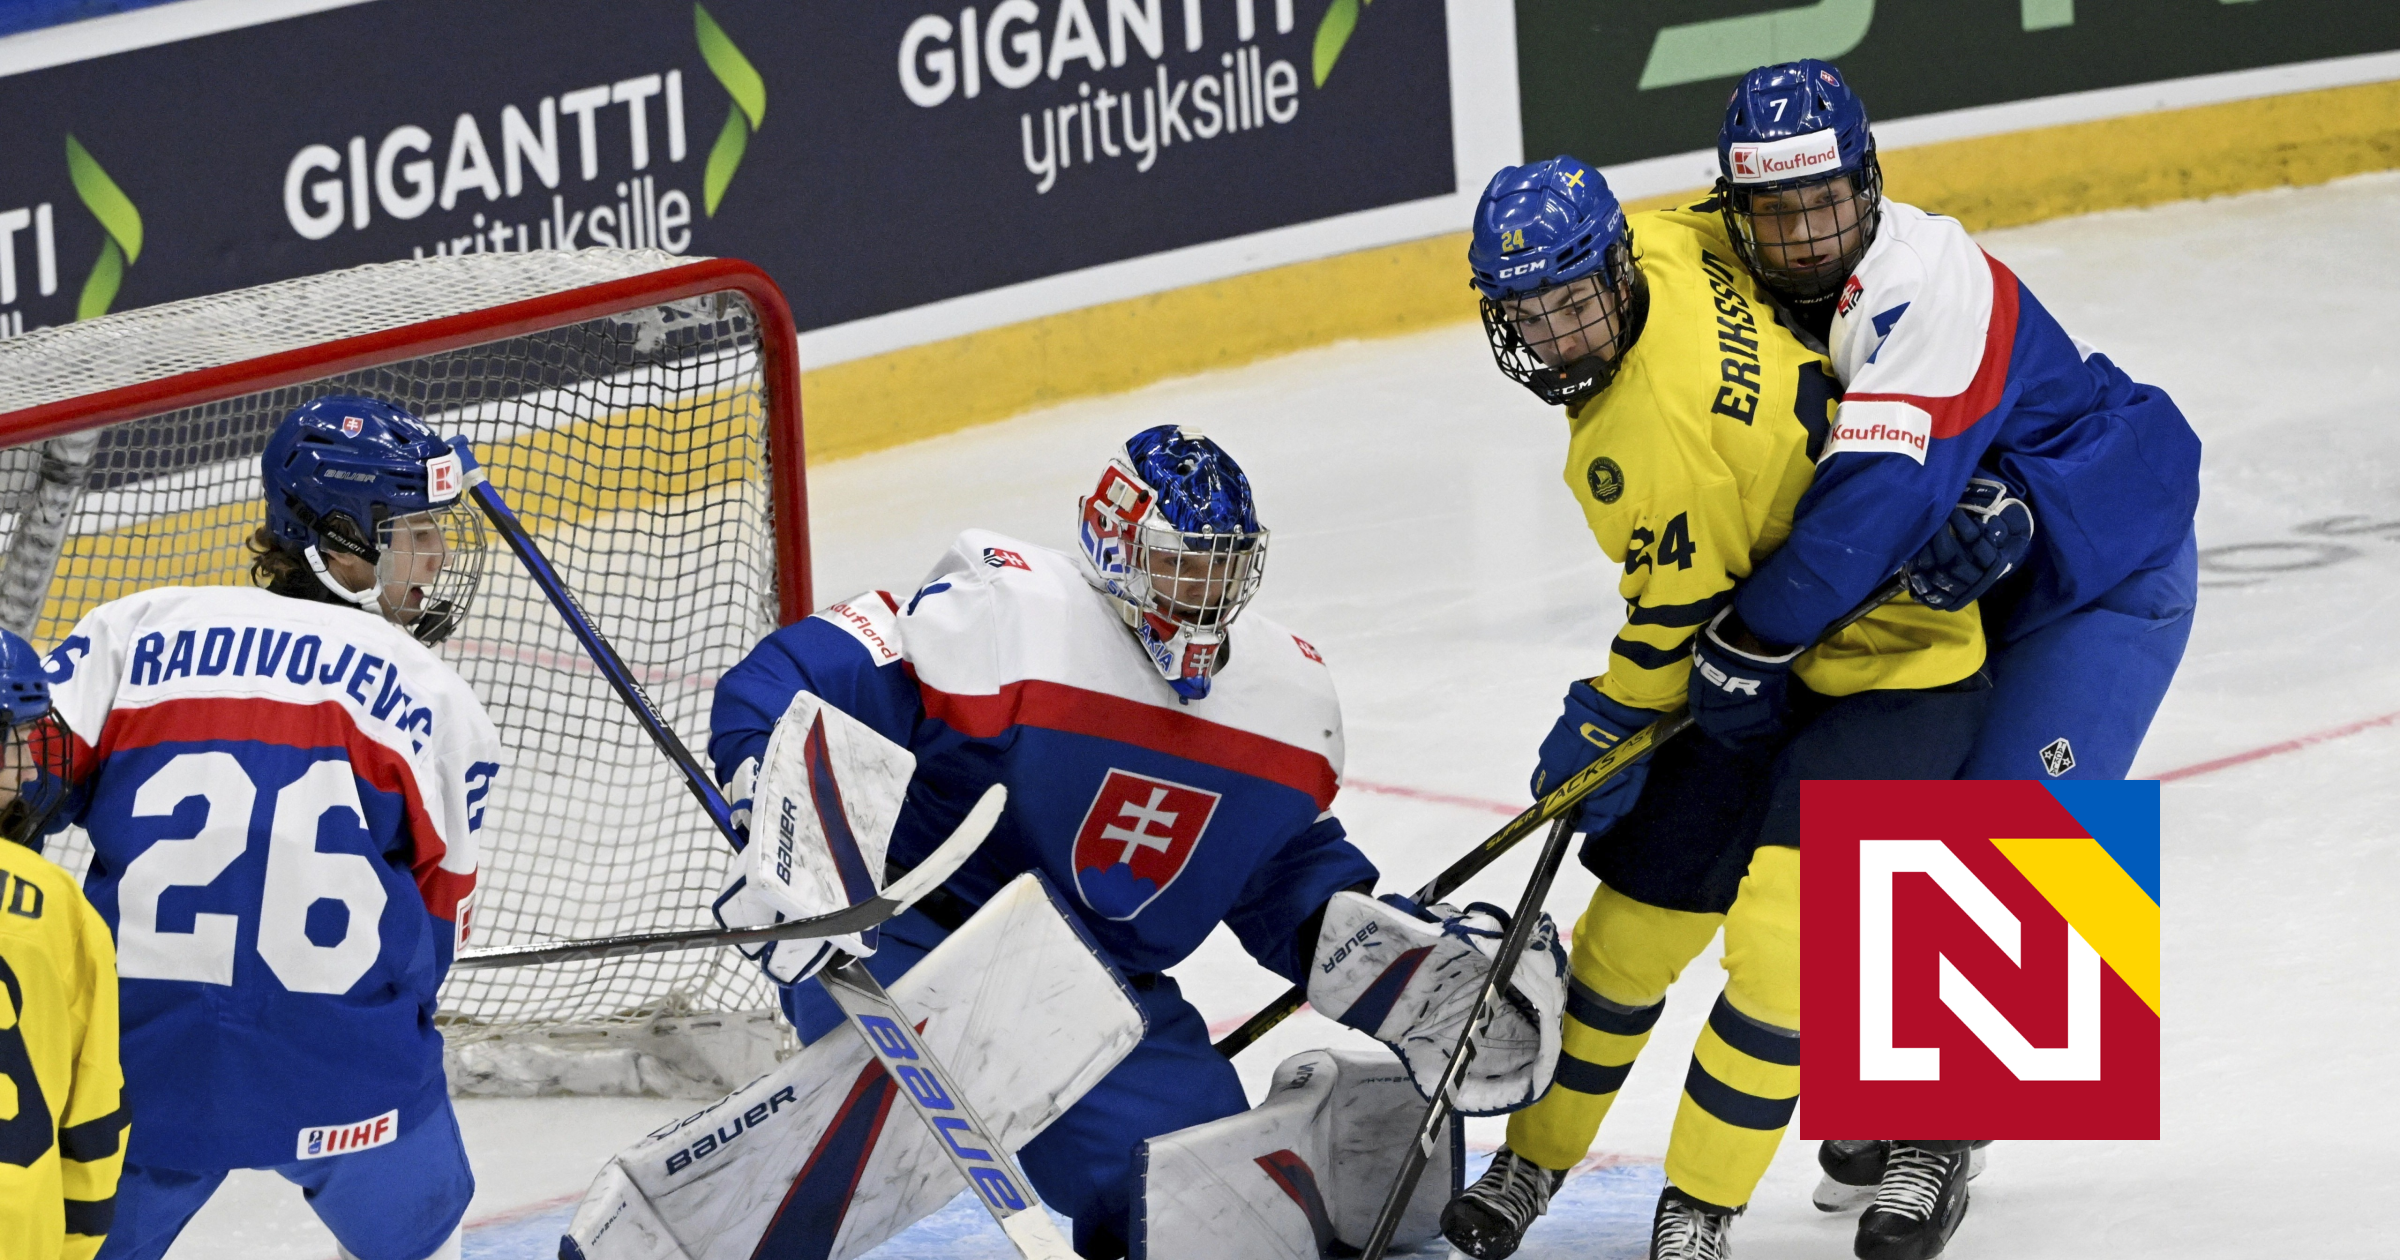 They see Slafkovski and believe that they too have a chance.  The match for bronze confirmed the progress of Slovak hockey, says expert Button